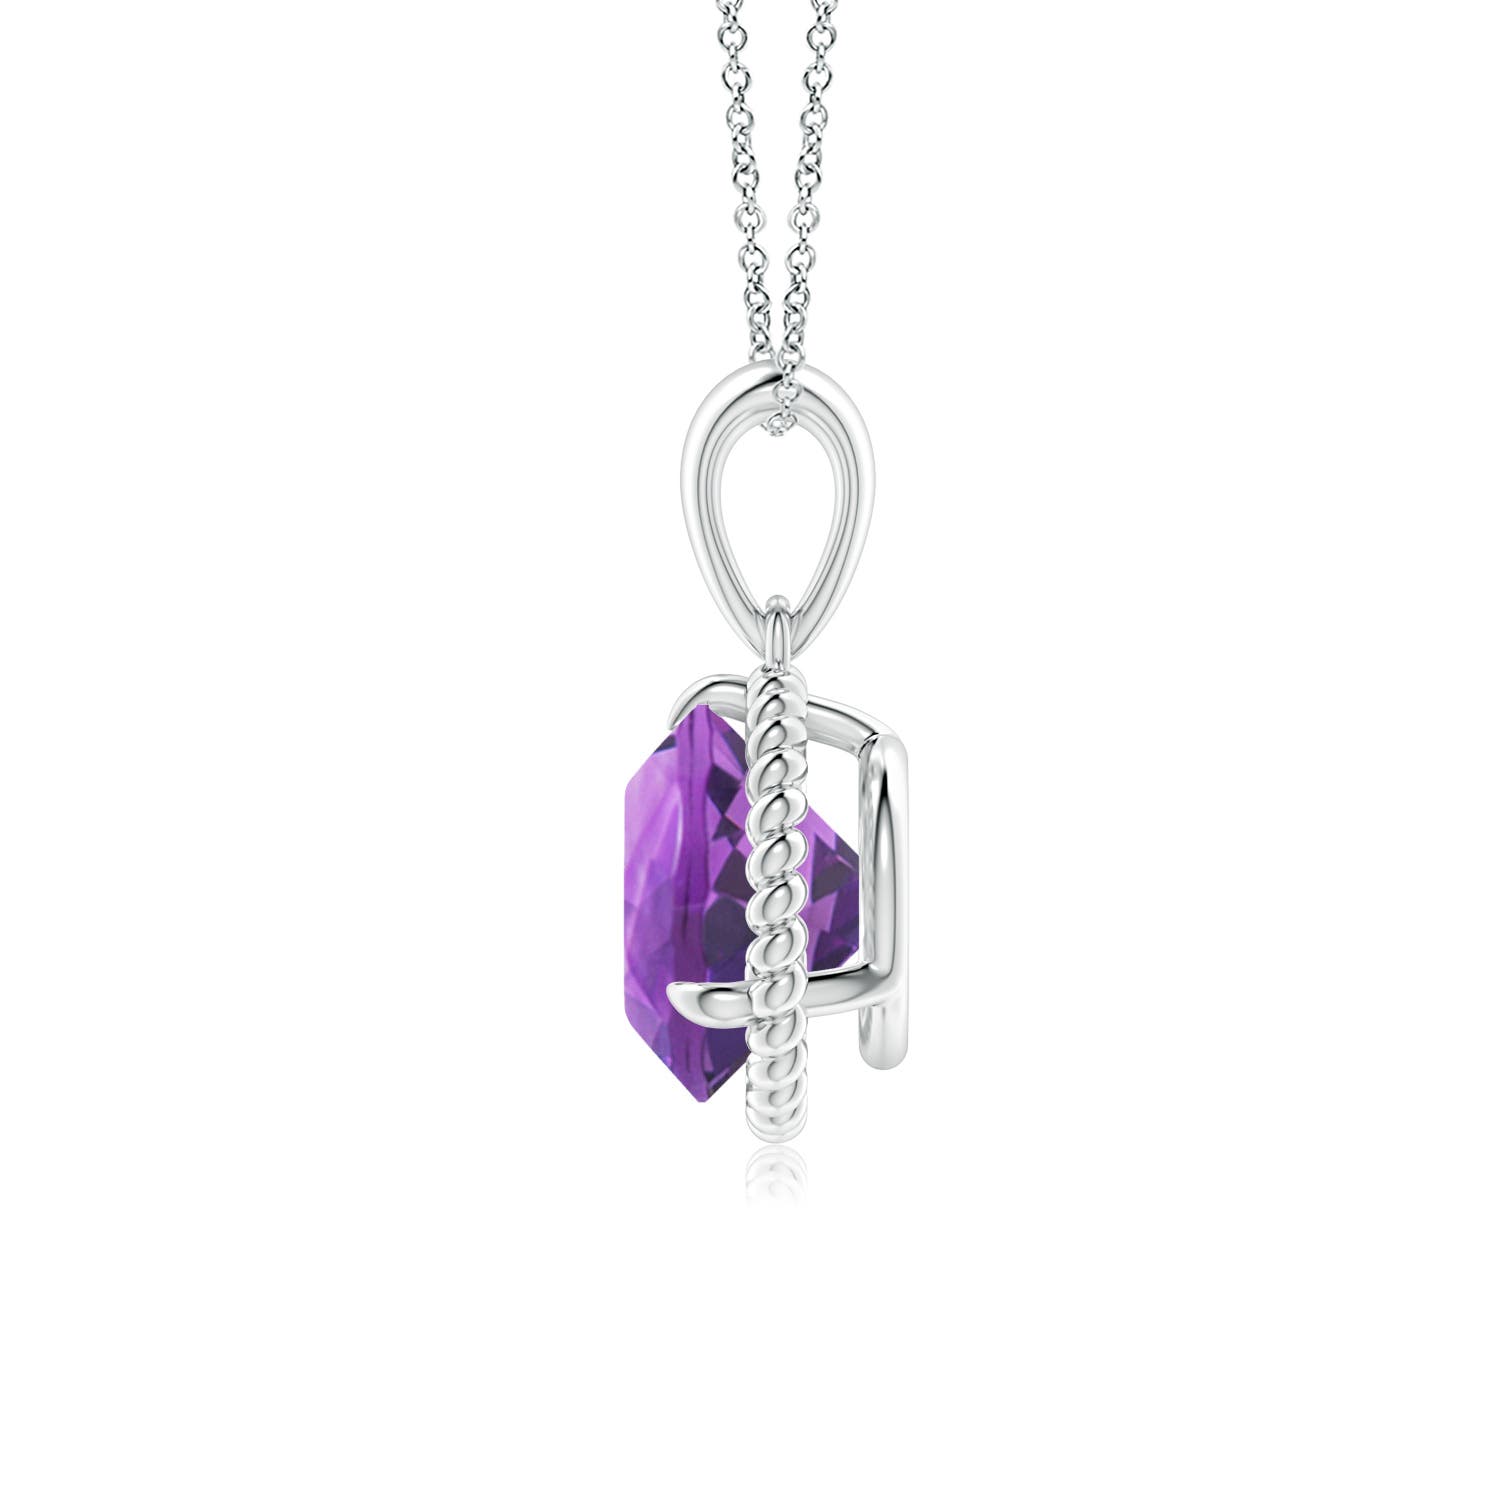 AA - Amethyst / 1.7 CT / 14 KT White Gold